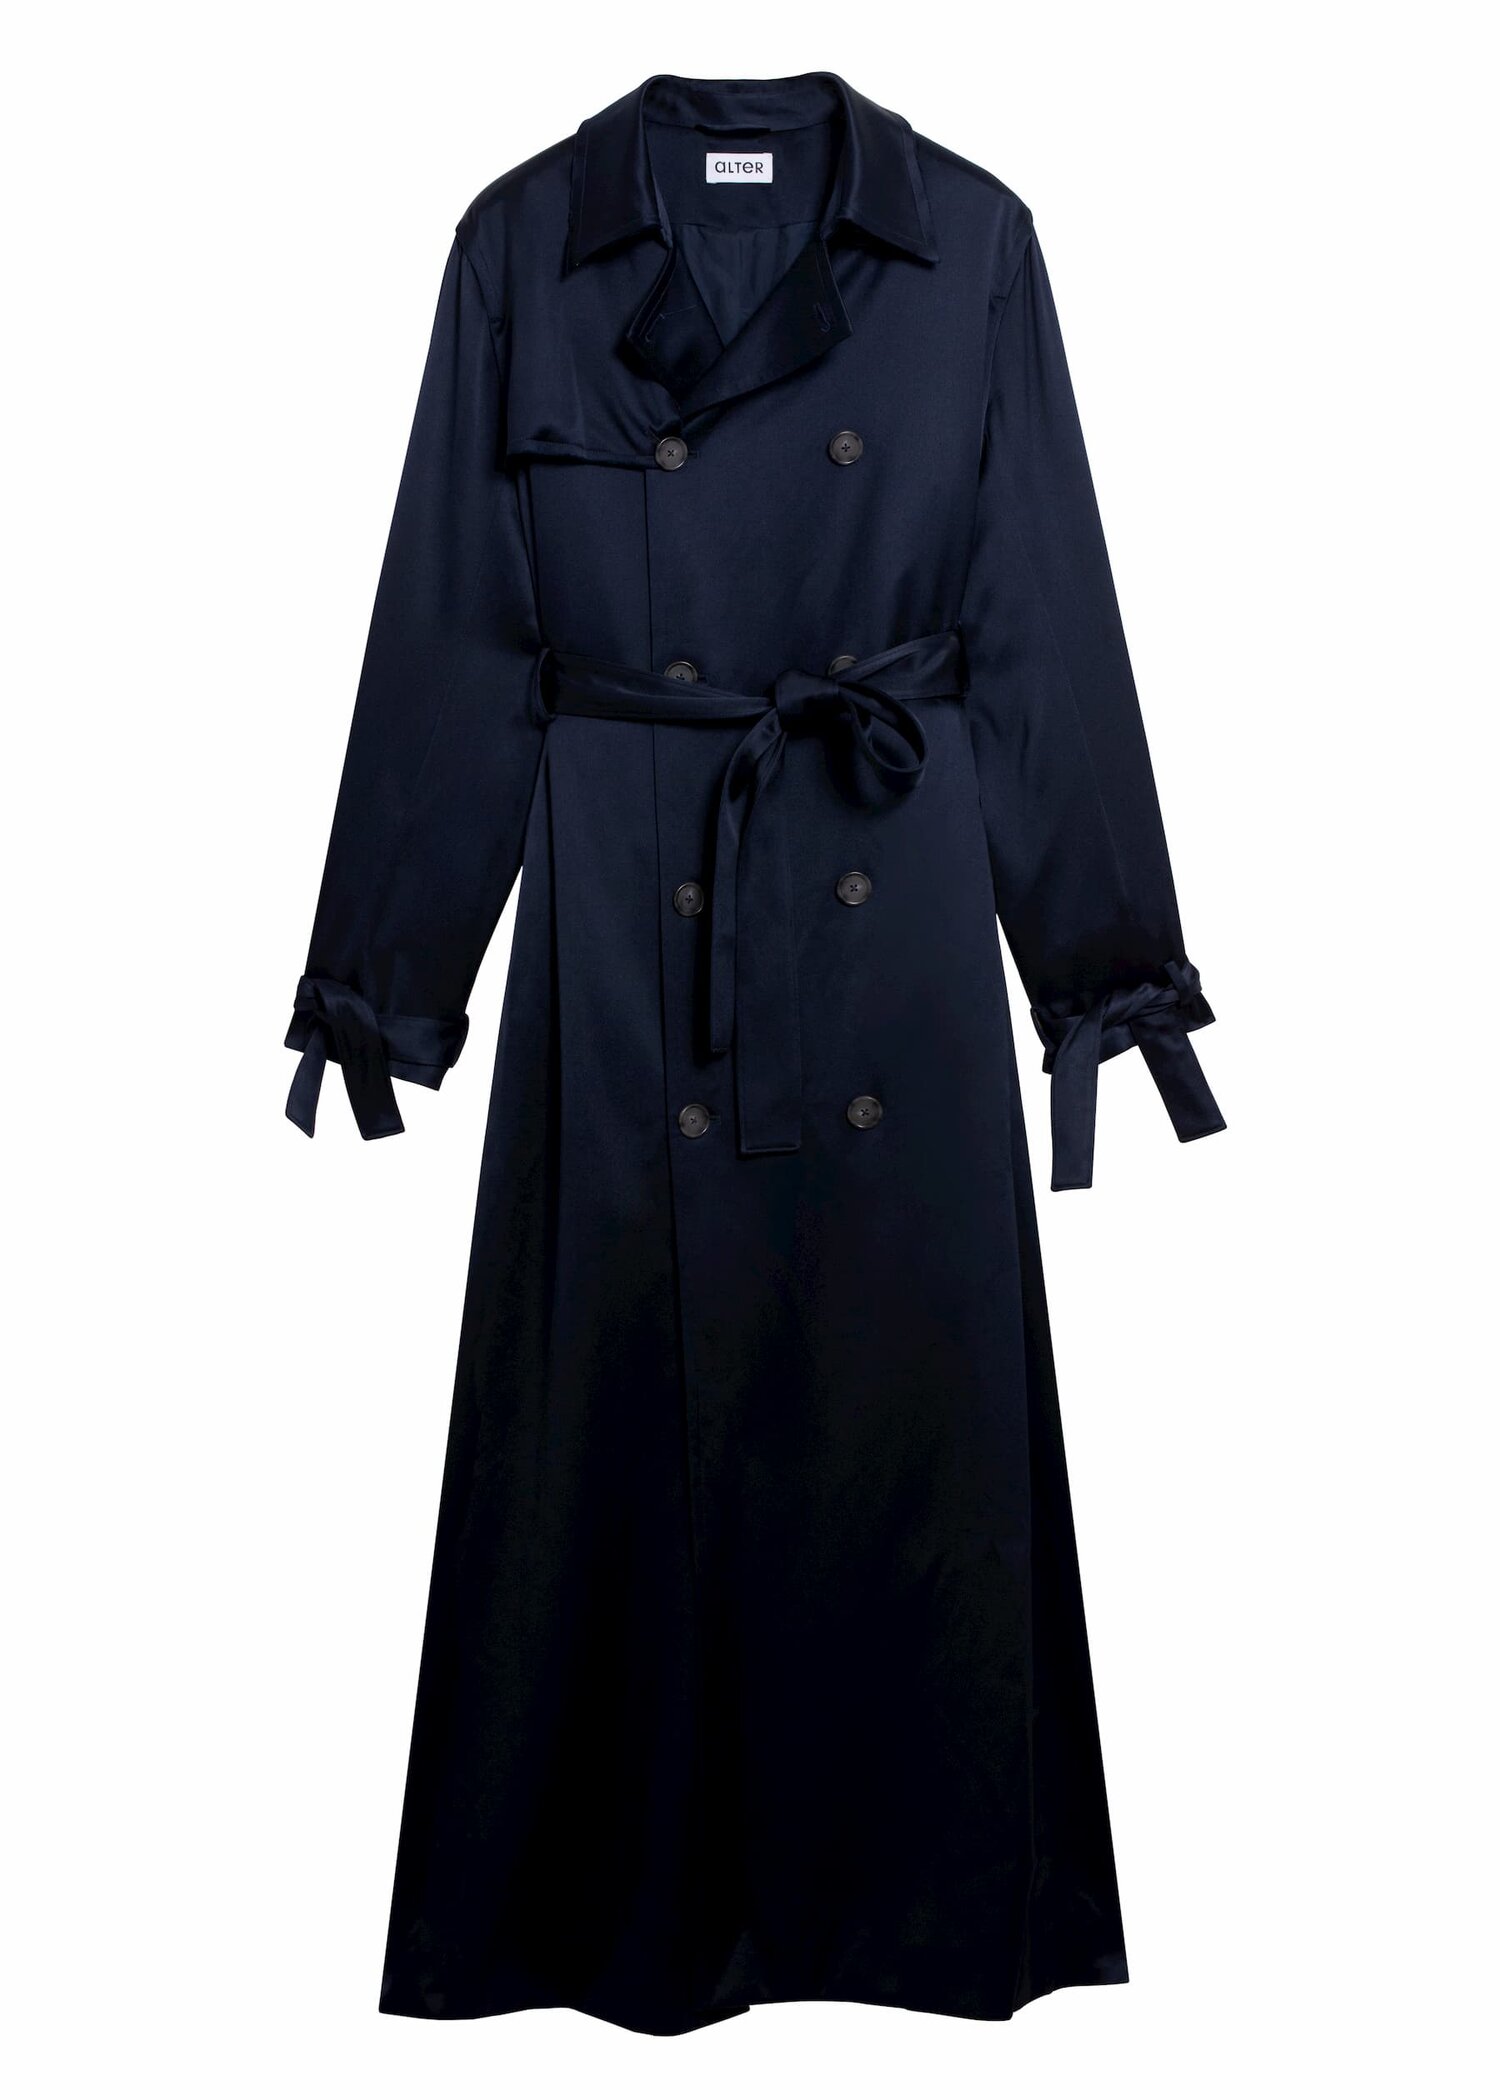 Alter Designs Long Trench Coat in Navy Satin — UFO No More